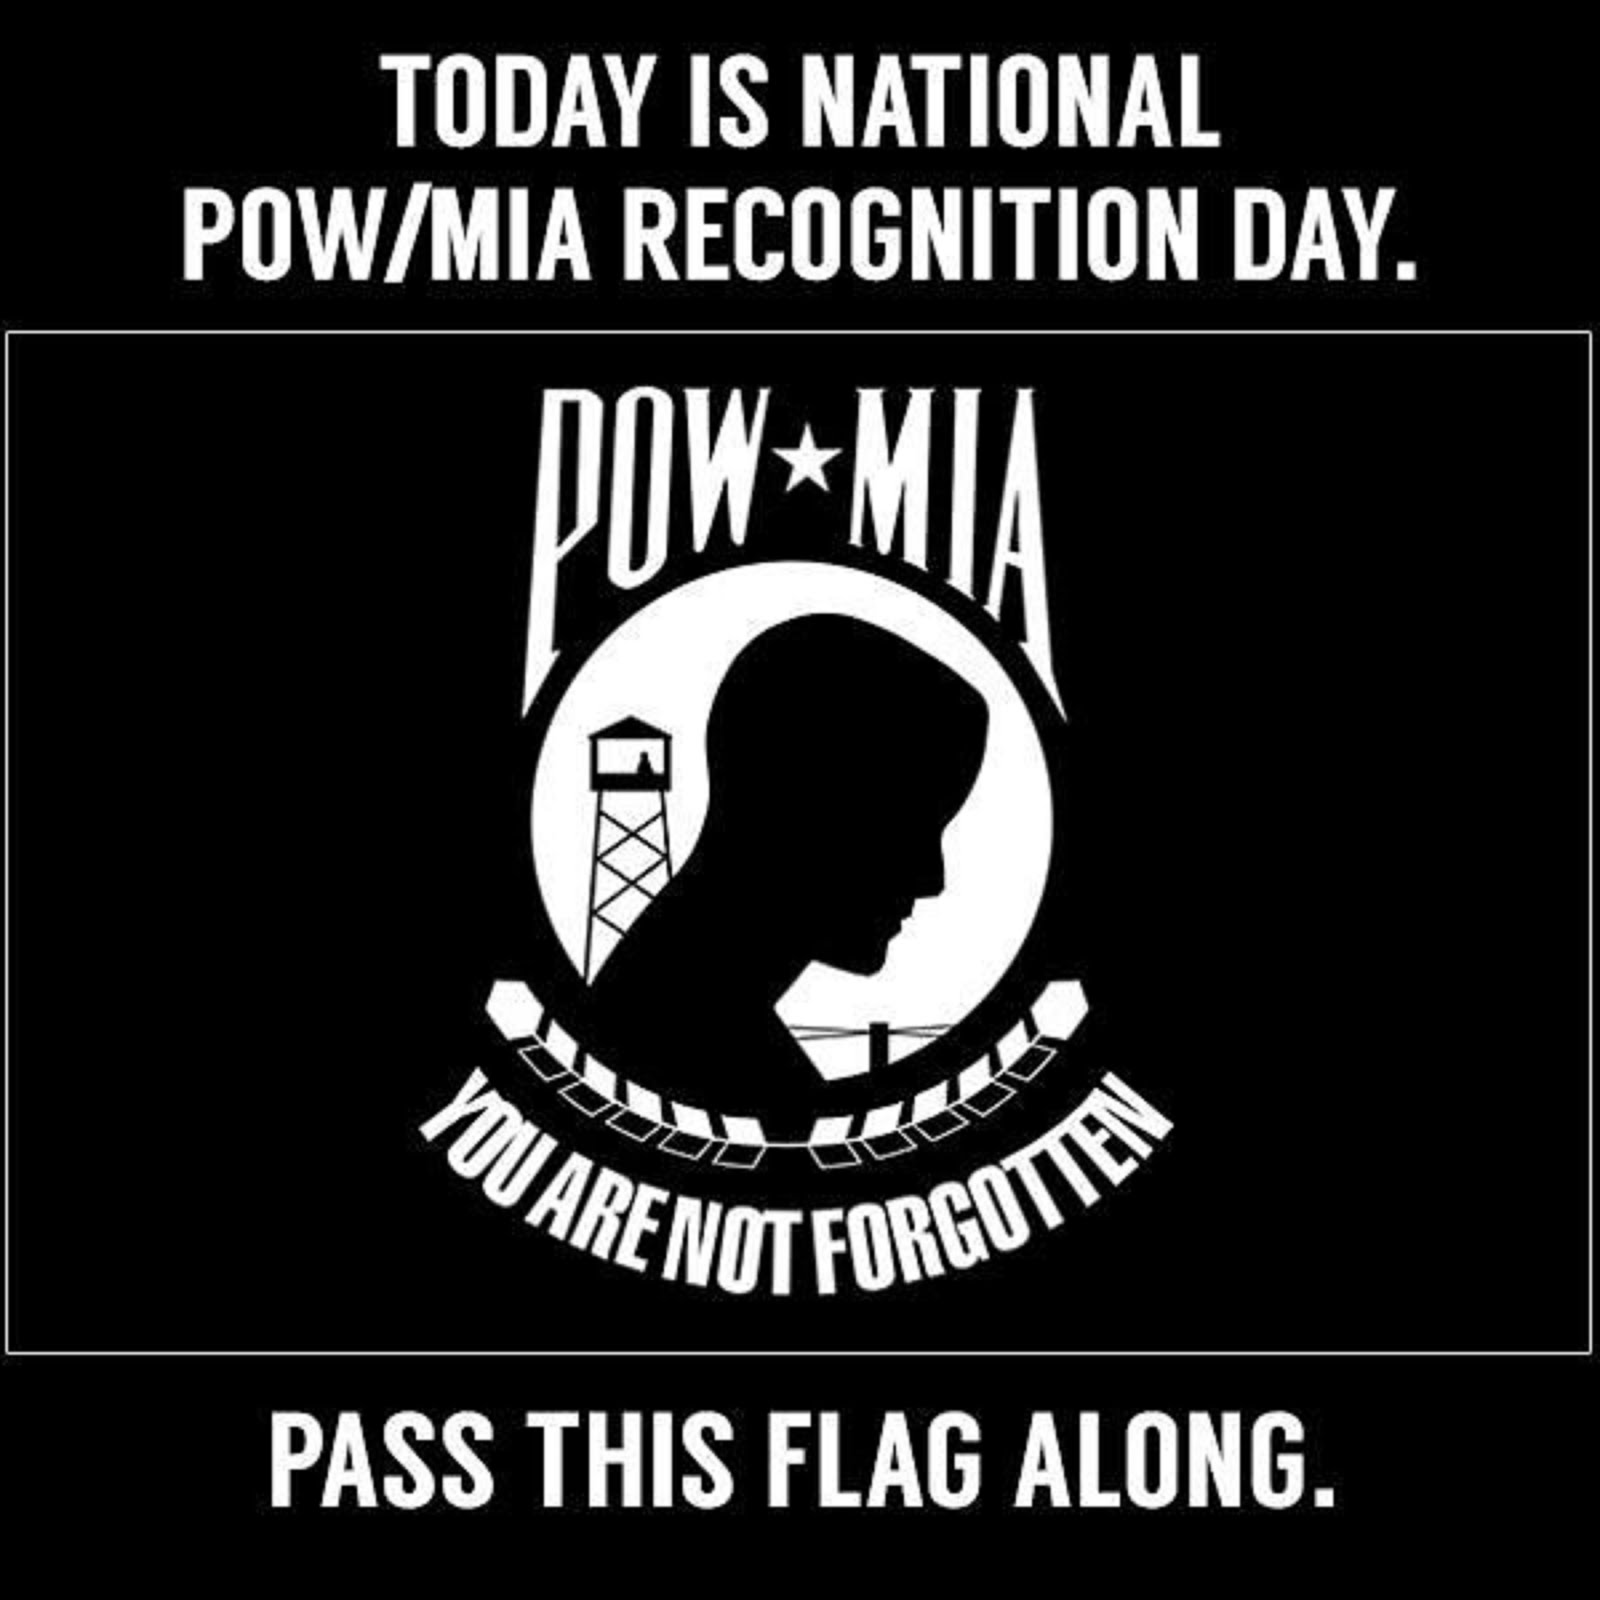 POW*NIA RECOGNITION DAY PASS THIS FLAG ALONG